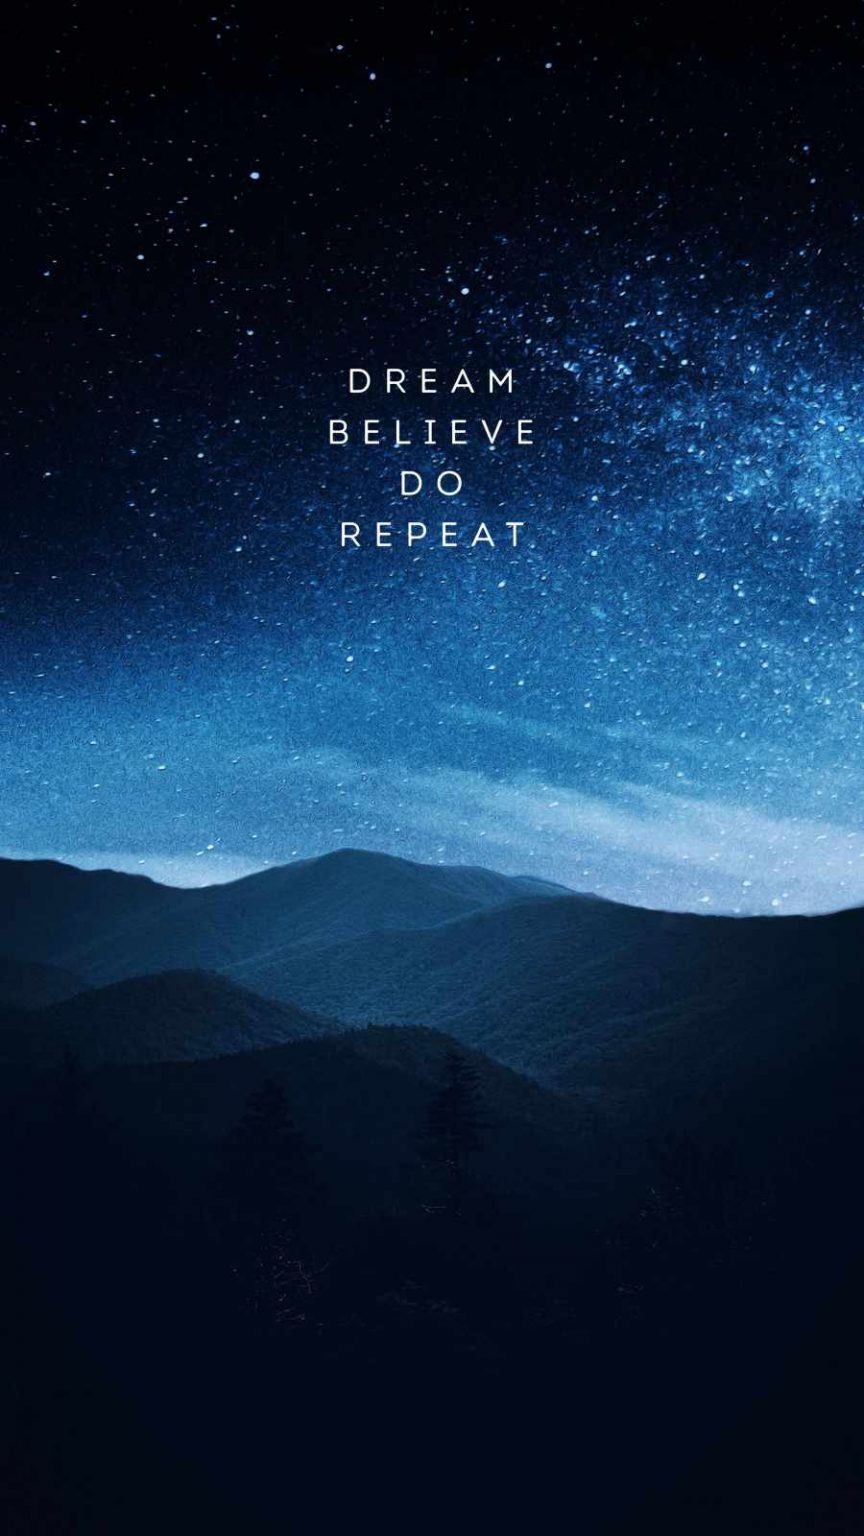 Dream - IPhone Wallpapers : iPhone Wallpapers